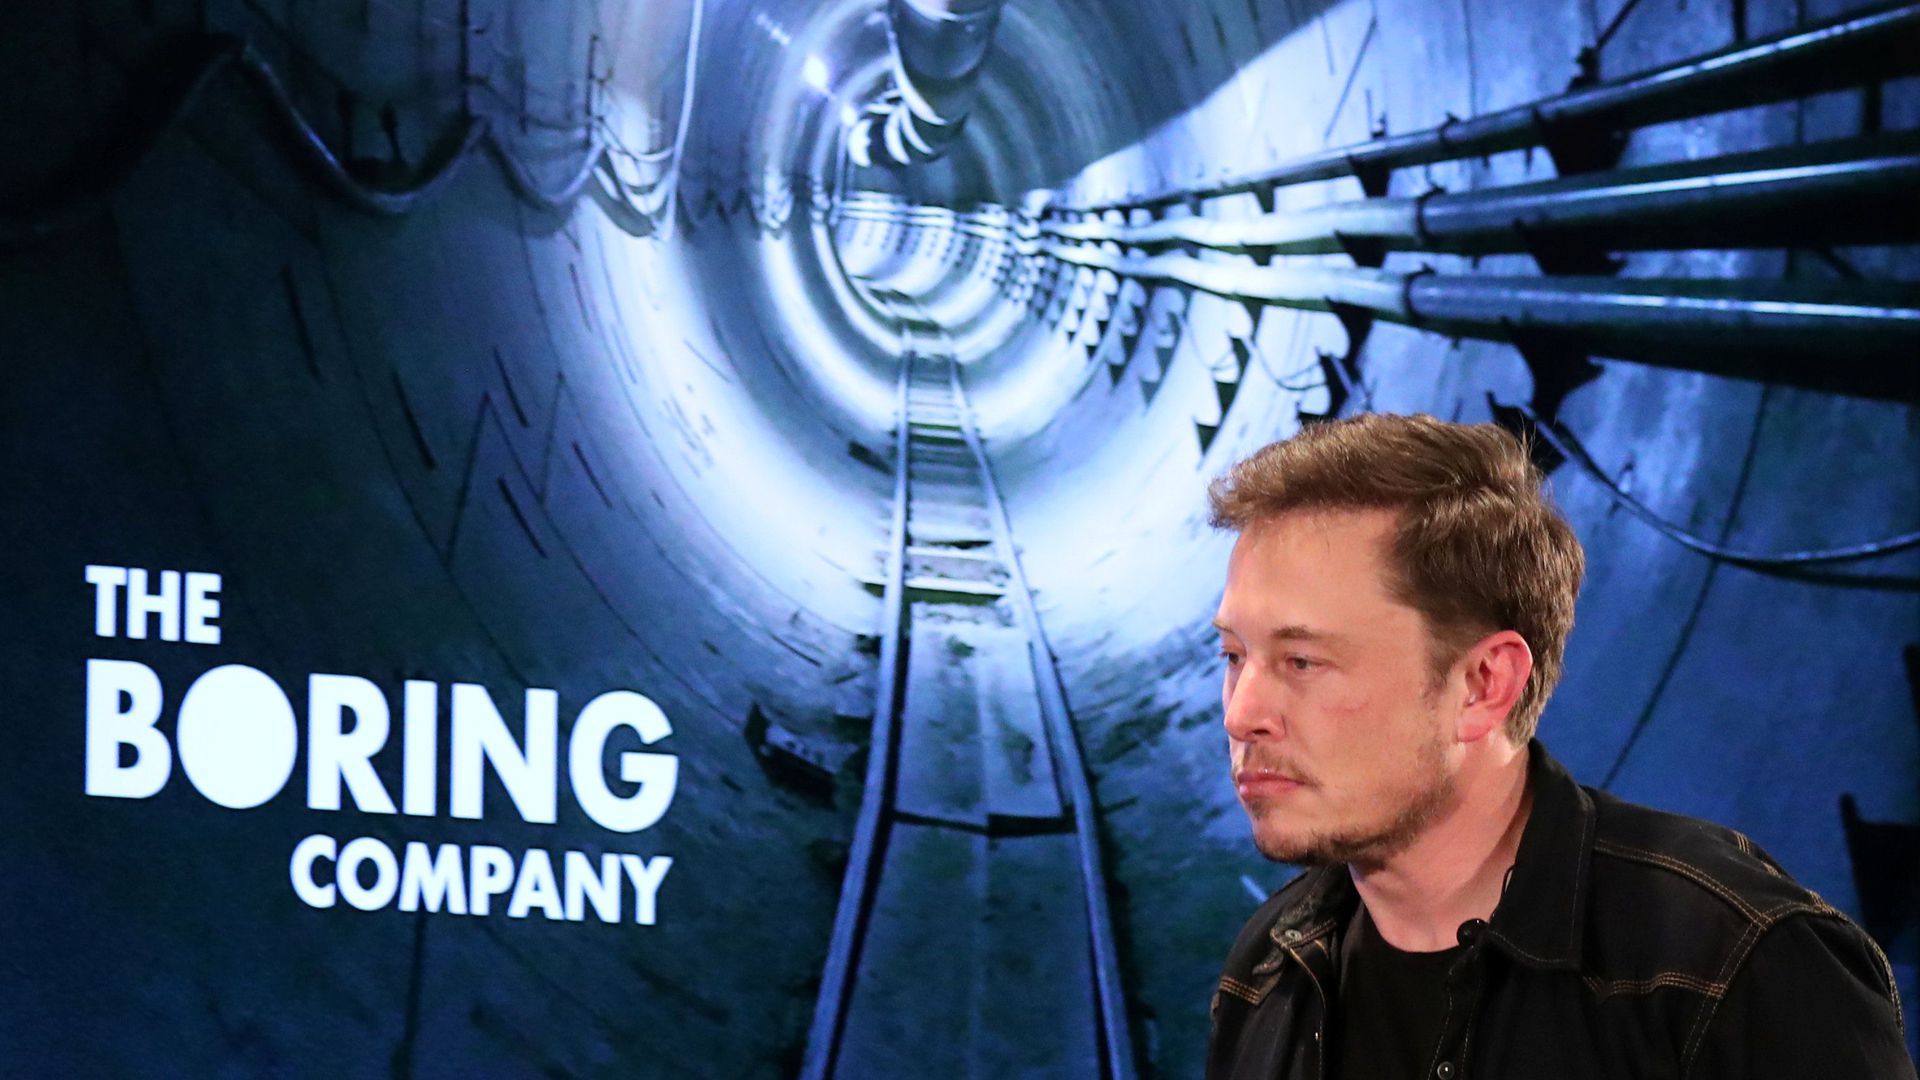 Picture of Elon Musk in front of a sign that says "the boring company"